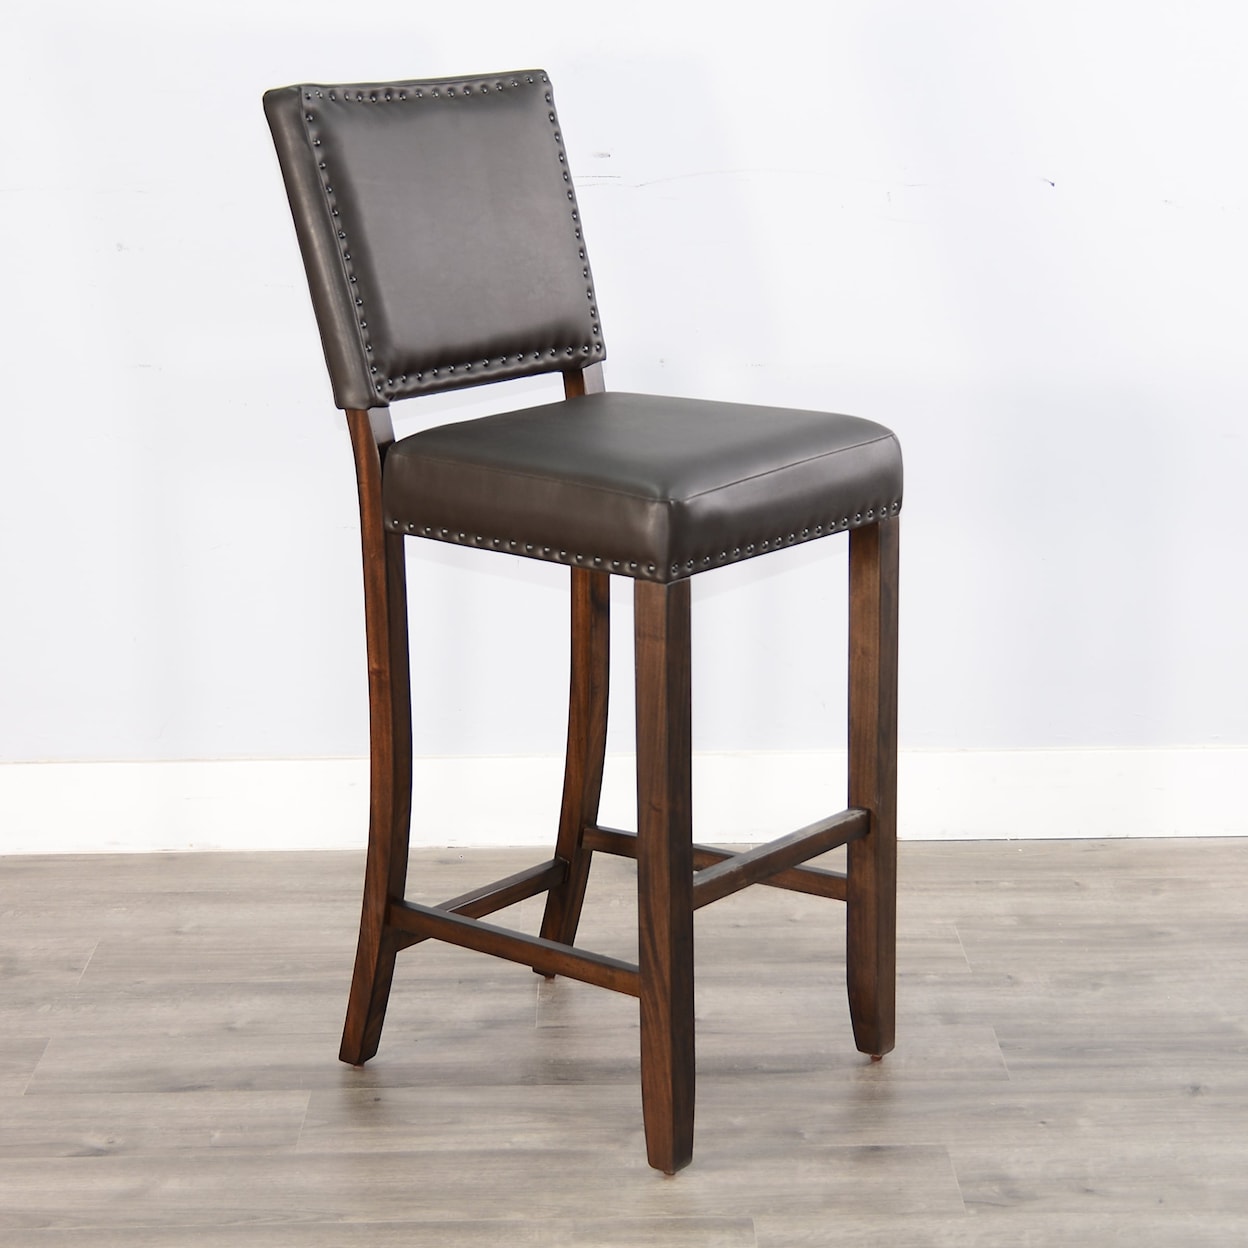 Sunny Designs Sunny Designs Upholstered Cushion Seat Barstool